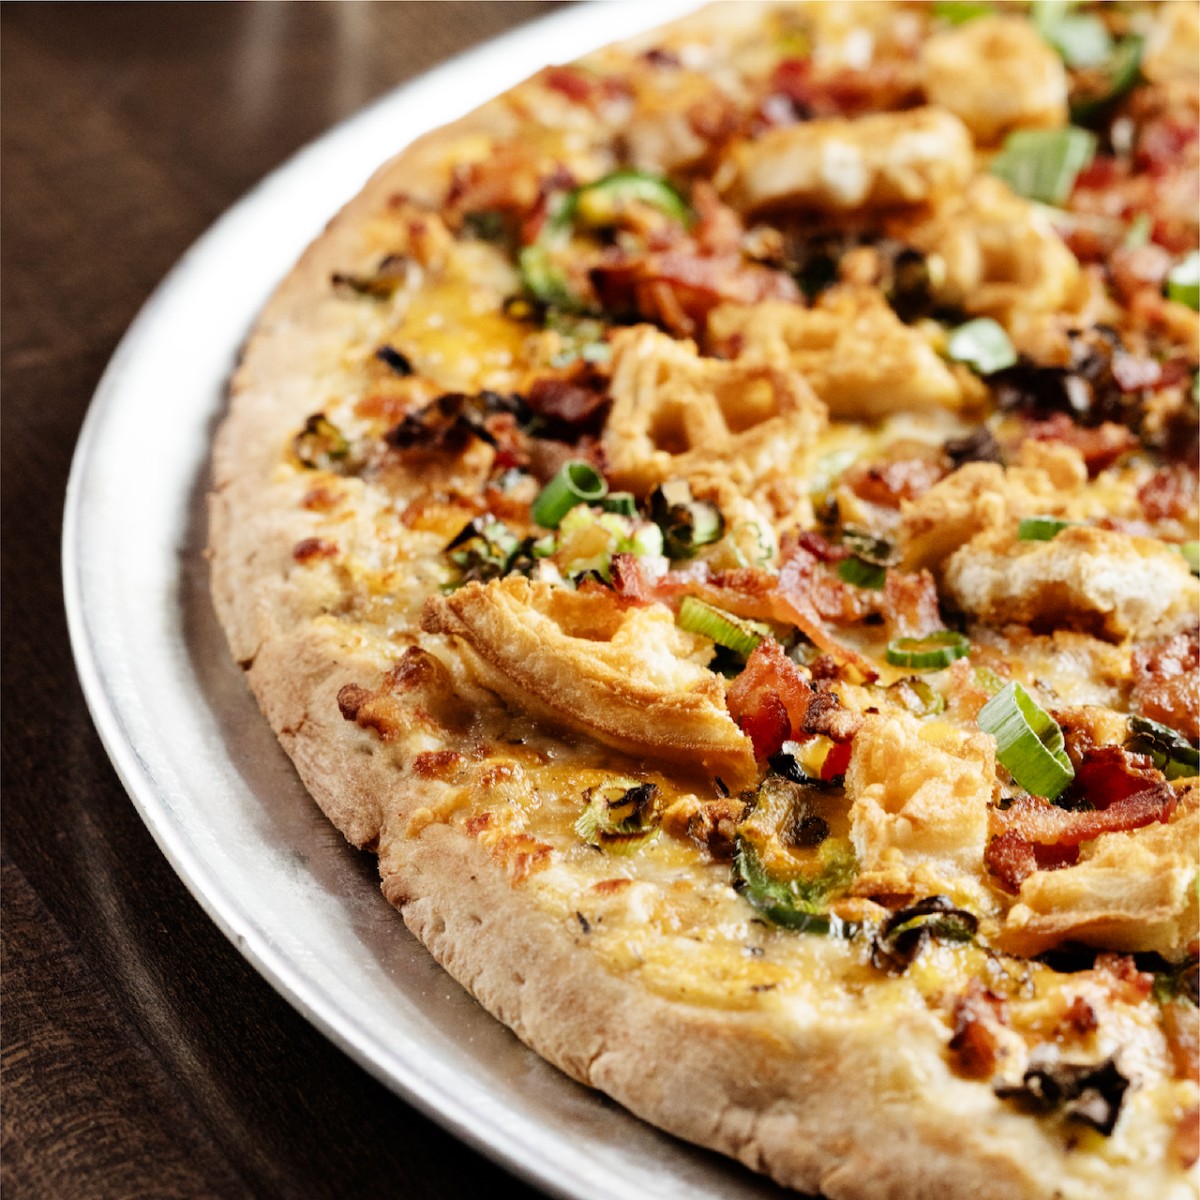 Chicken and Waffles Pizza is coming soon! You wont want to miss this dope pizza! This is one high priority pie you'll want to inhale this 420. Make sure to stop by and give it a try next week!